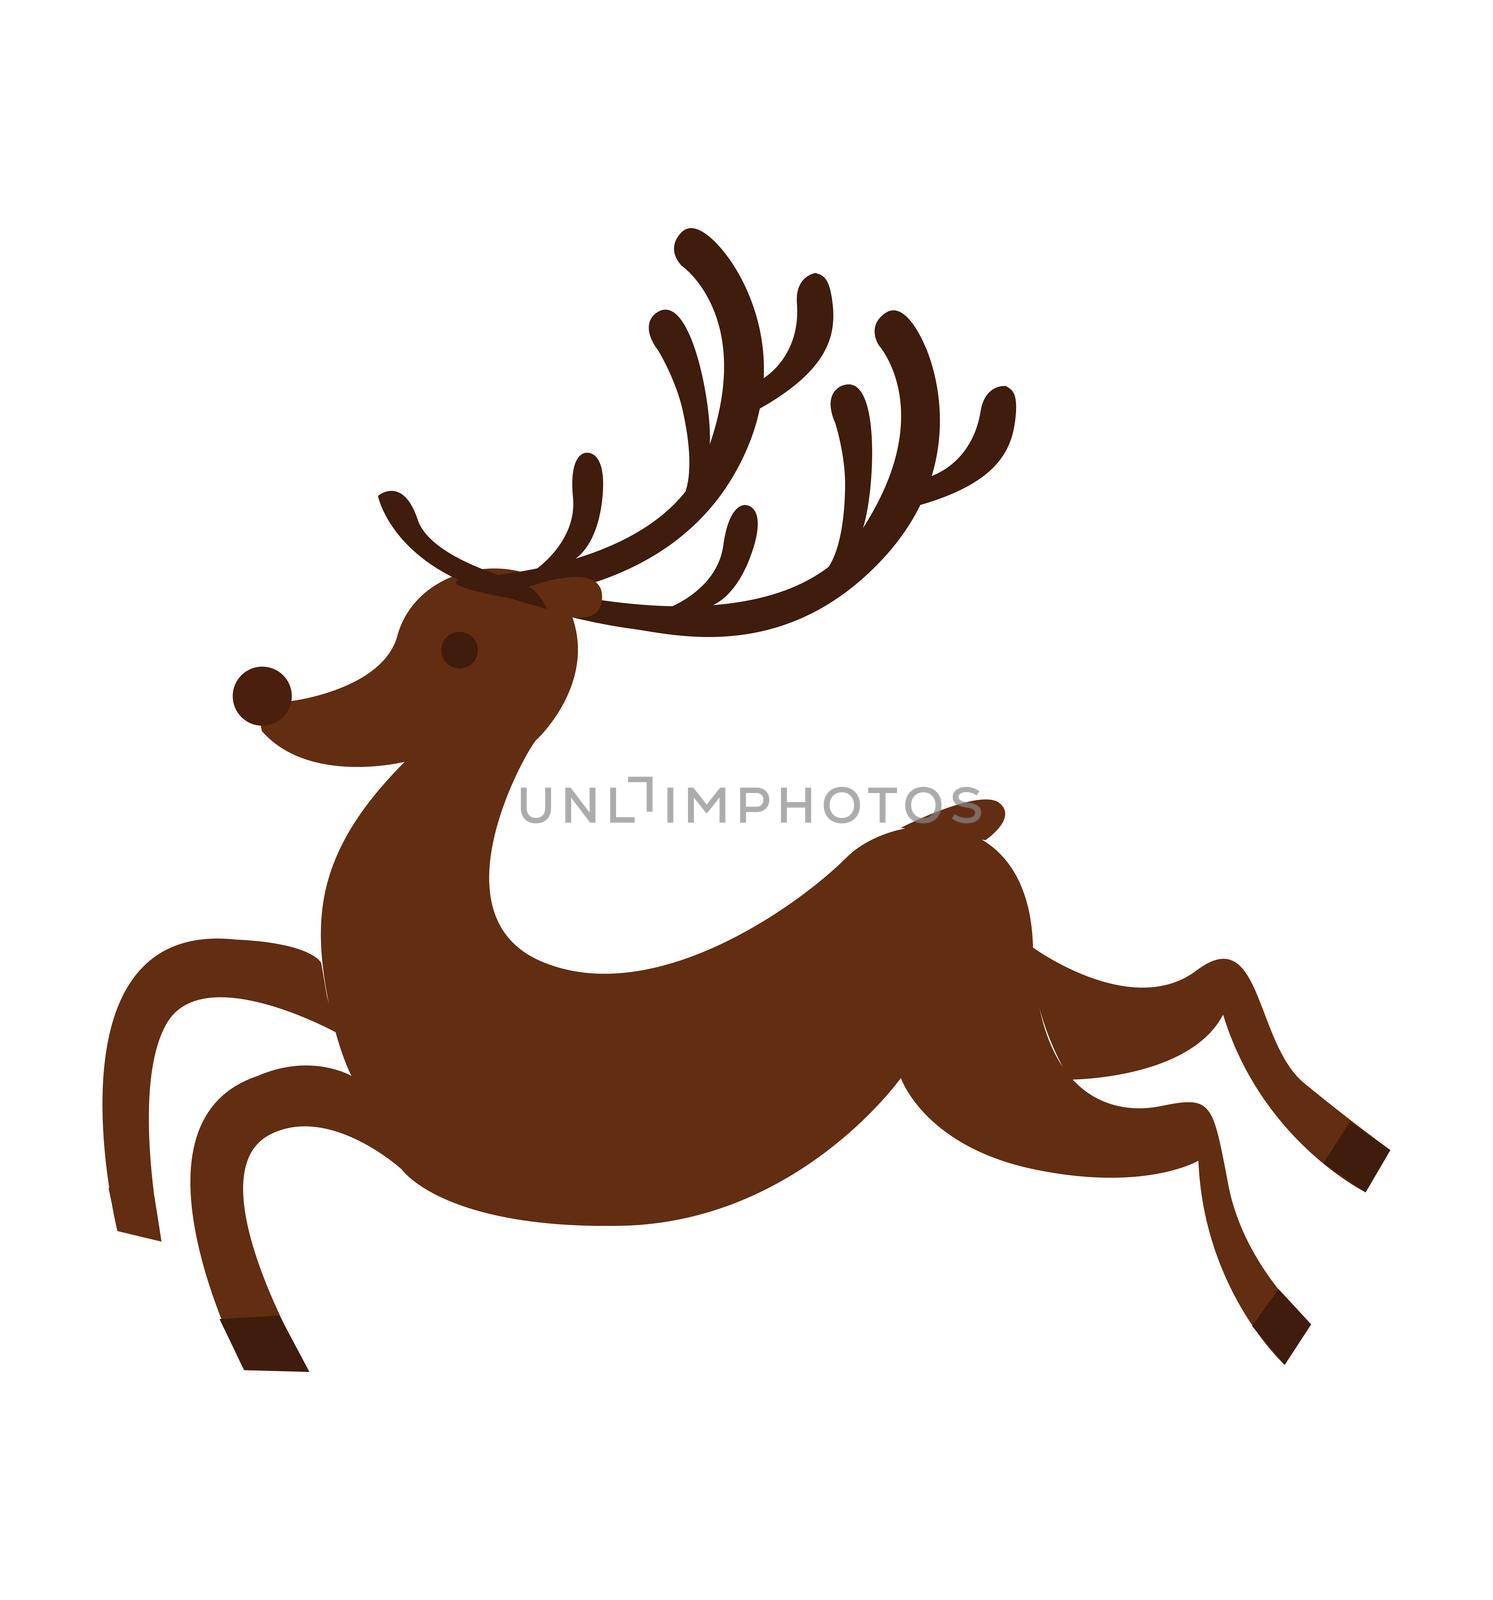 Reindeer runs or fly silhouette christmas icon vector flat vector illustration isolated on white eps 10